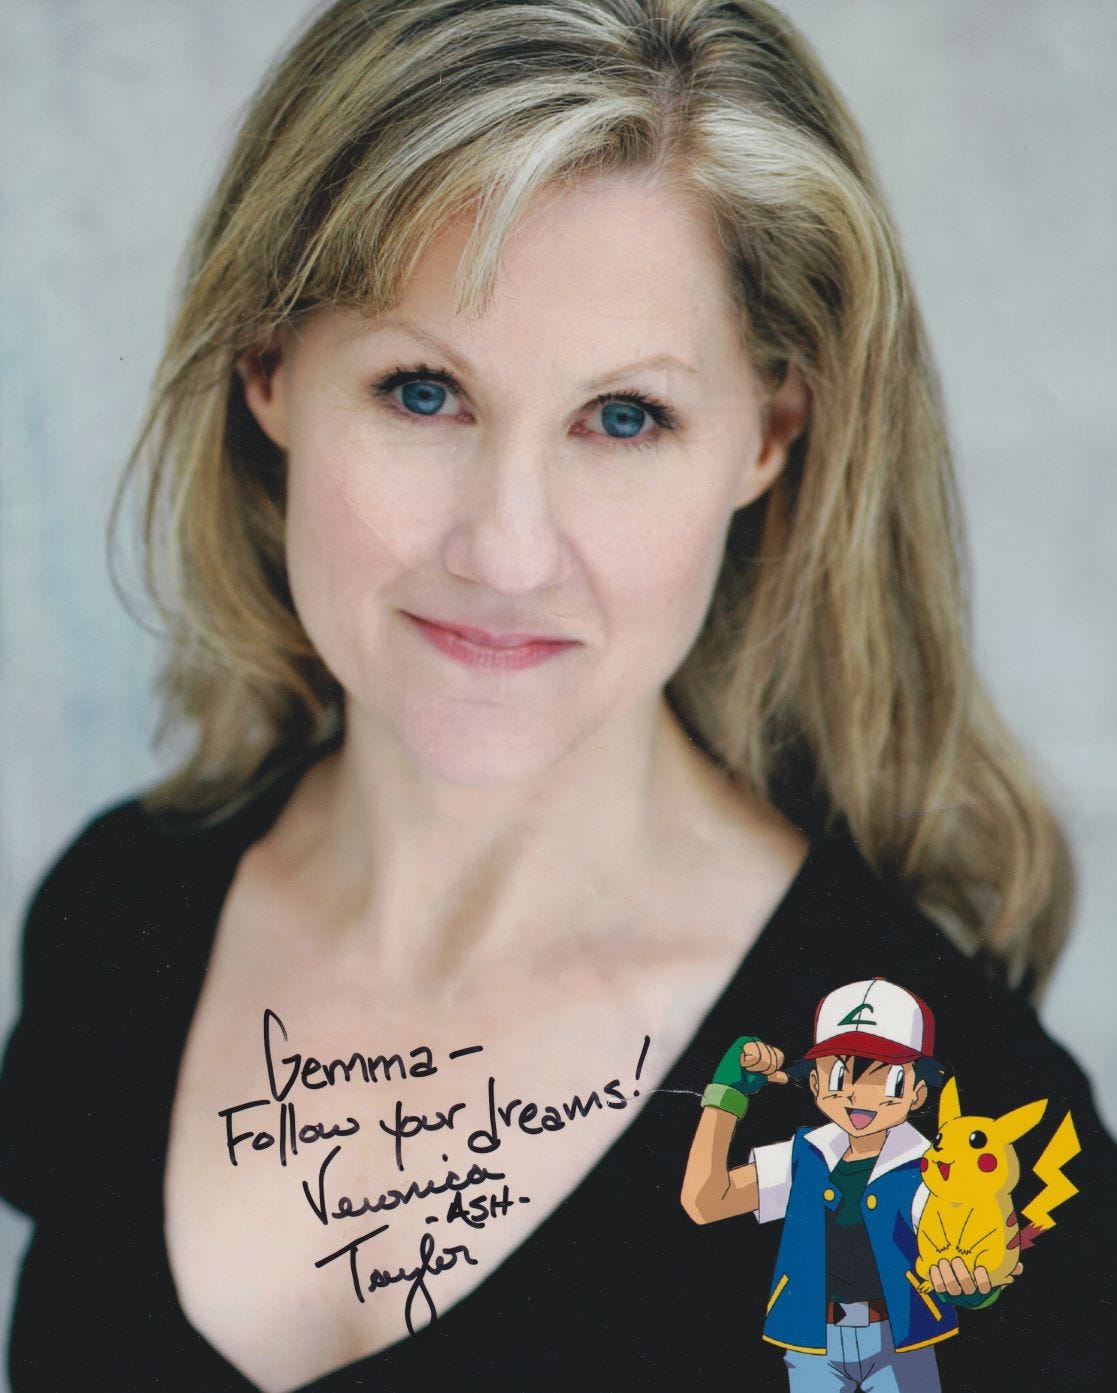 Gemma shared this signed autograph from Veronica Taylor, the original voice actress for Ash Ketchum in the English-adapted Pokémon anime